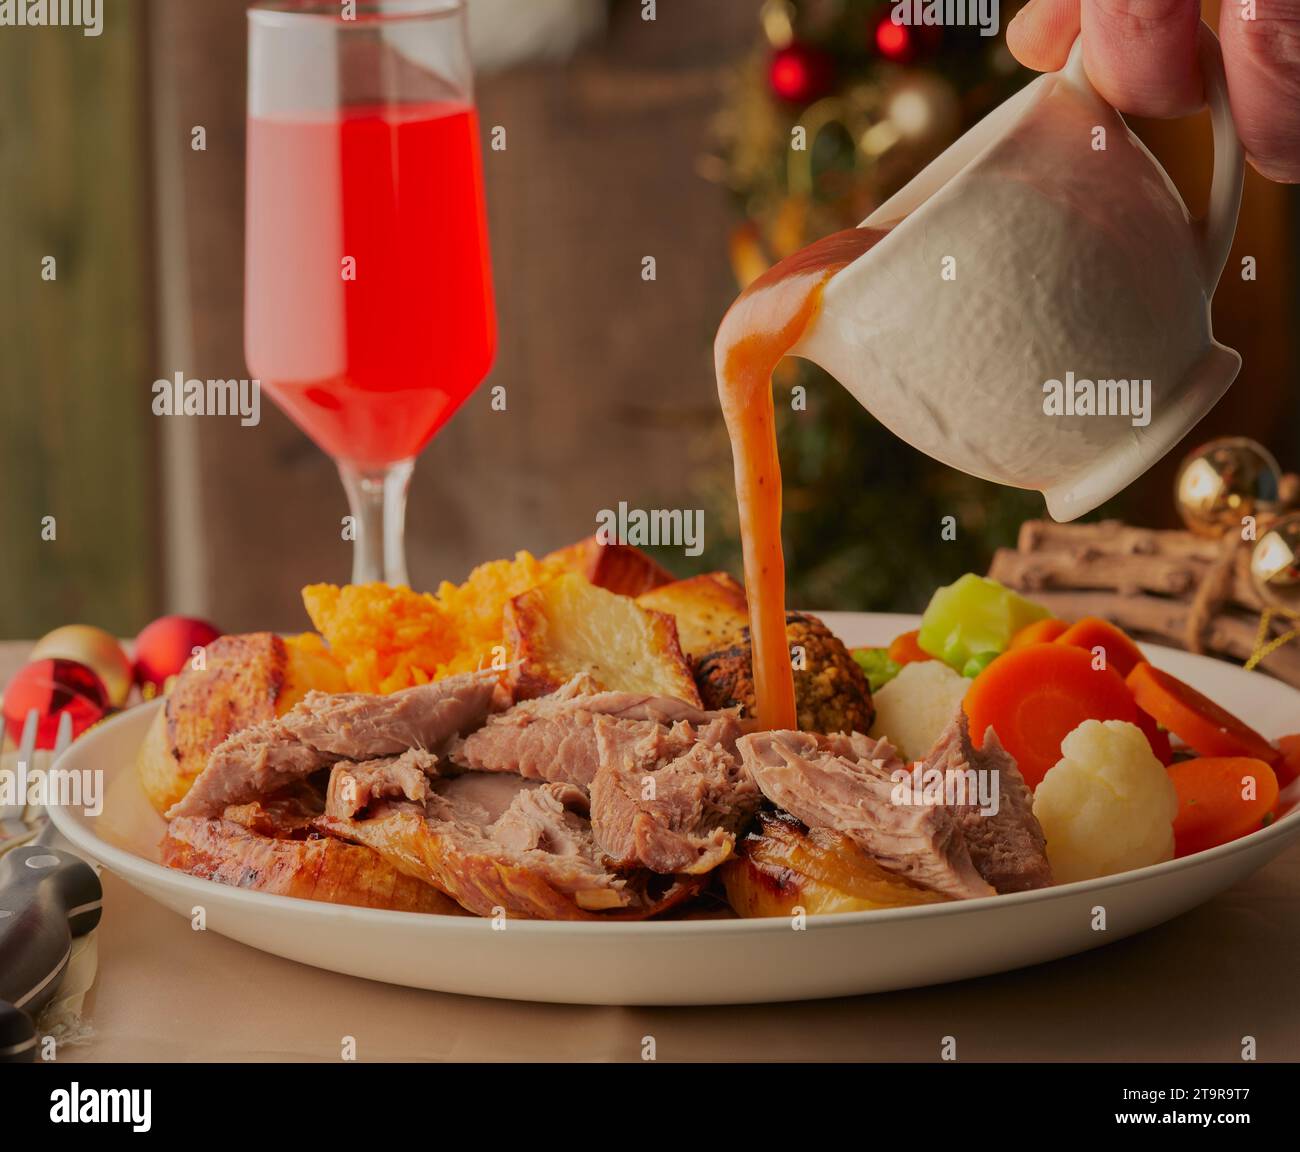 Christmas turkey dinner with gravy being poured over it. Stock Photo